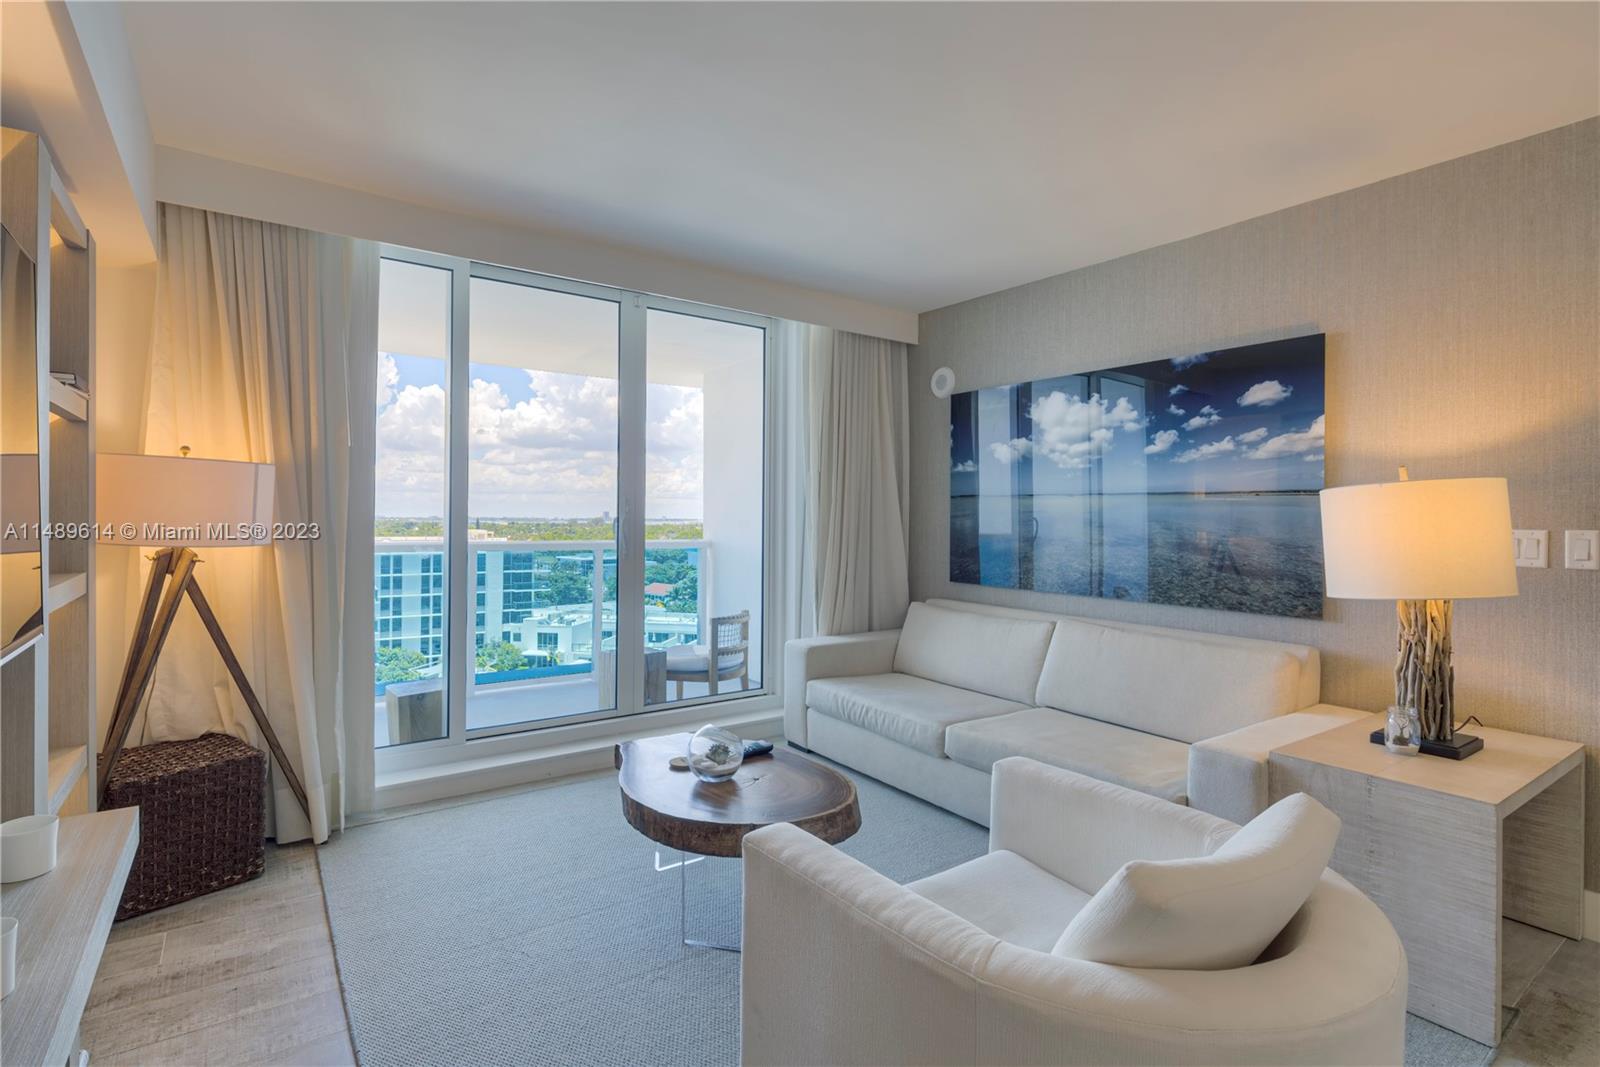 Embark on a lifestyle of luxury in this fully furnished and stocked 2-bed, 2-bath condo, featuring mesmerizing skyline views. Immerse yourself in daily sunsets and enjoy exclusive amenities like a 14,000 sq. ft. gym, spa, and chauffeured electric cars. Reside in one of Miami Beach's most prestigious addresses, relishing resort-style living, a private rooftop pool and bar, four restaurants, and more. In partnership with Five Star Luxury Travel, this property not only ensures opulent living but also presents a compelling investment opportunity with remarkable rental income. Make this condo your own for a life of lavish comfort—it's ready for immediate rentals, fully furnished and stocked, adding an extra layer of convenience to its allure.